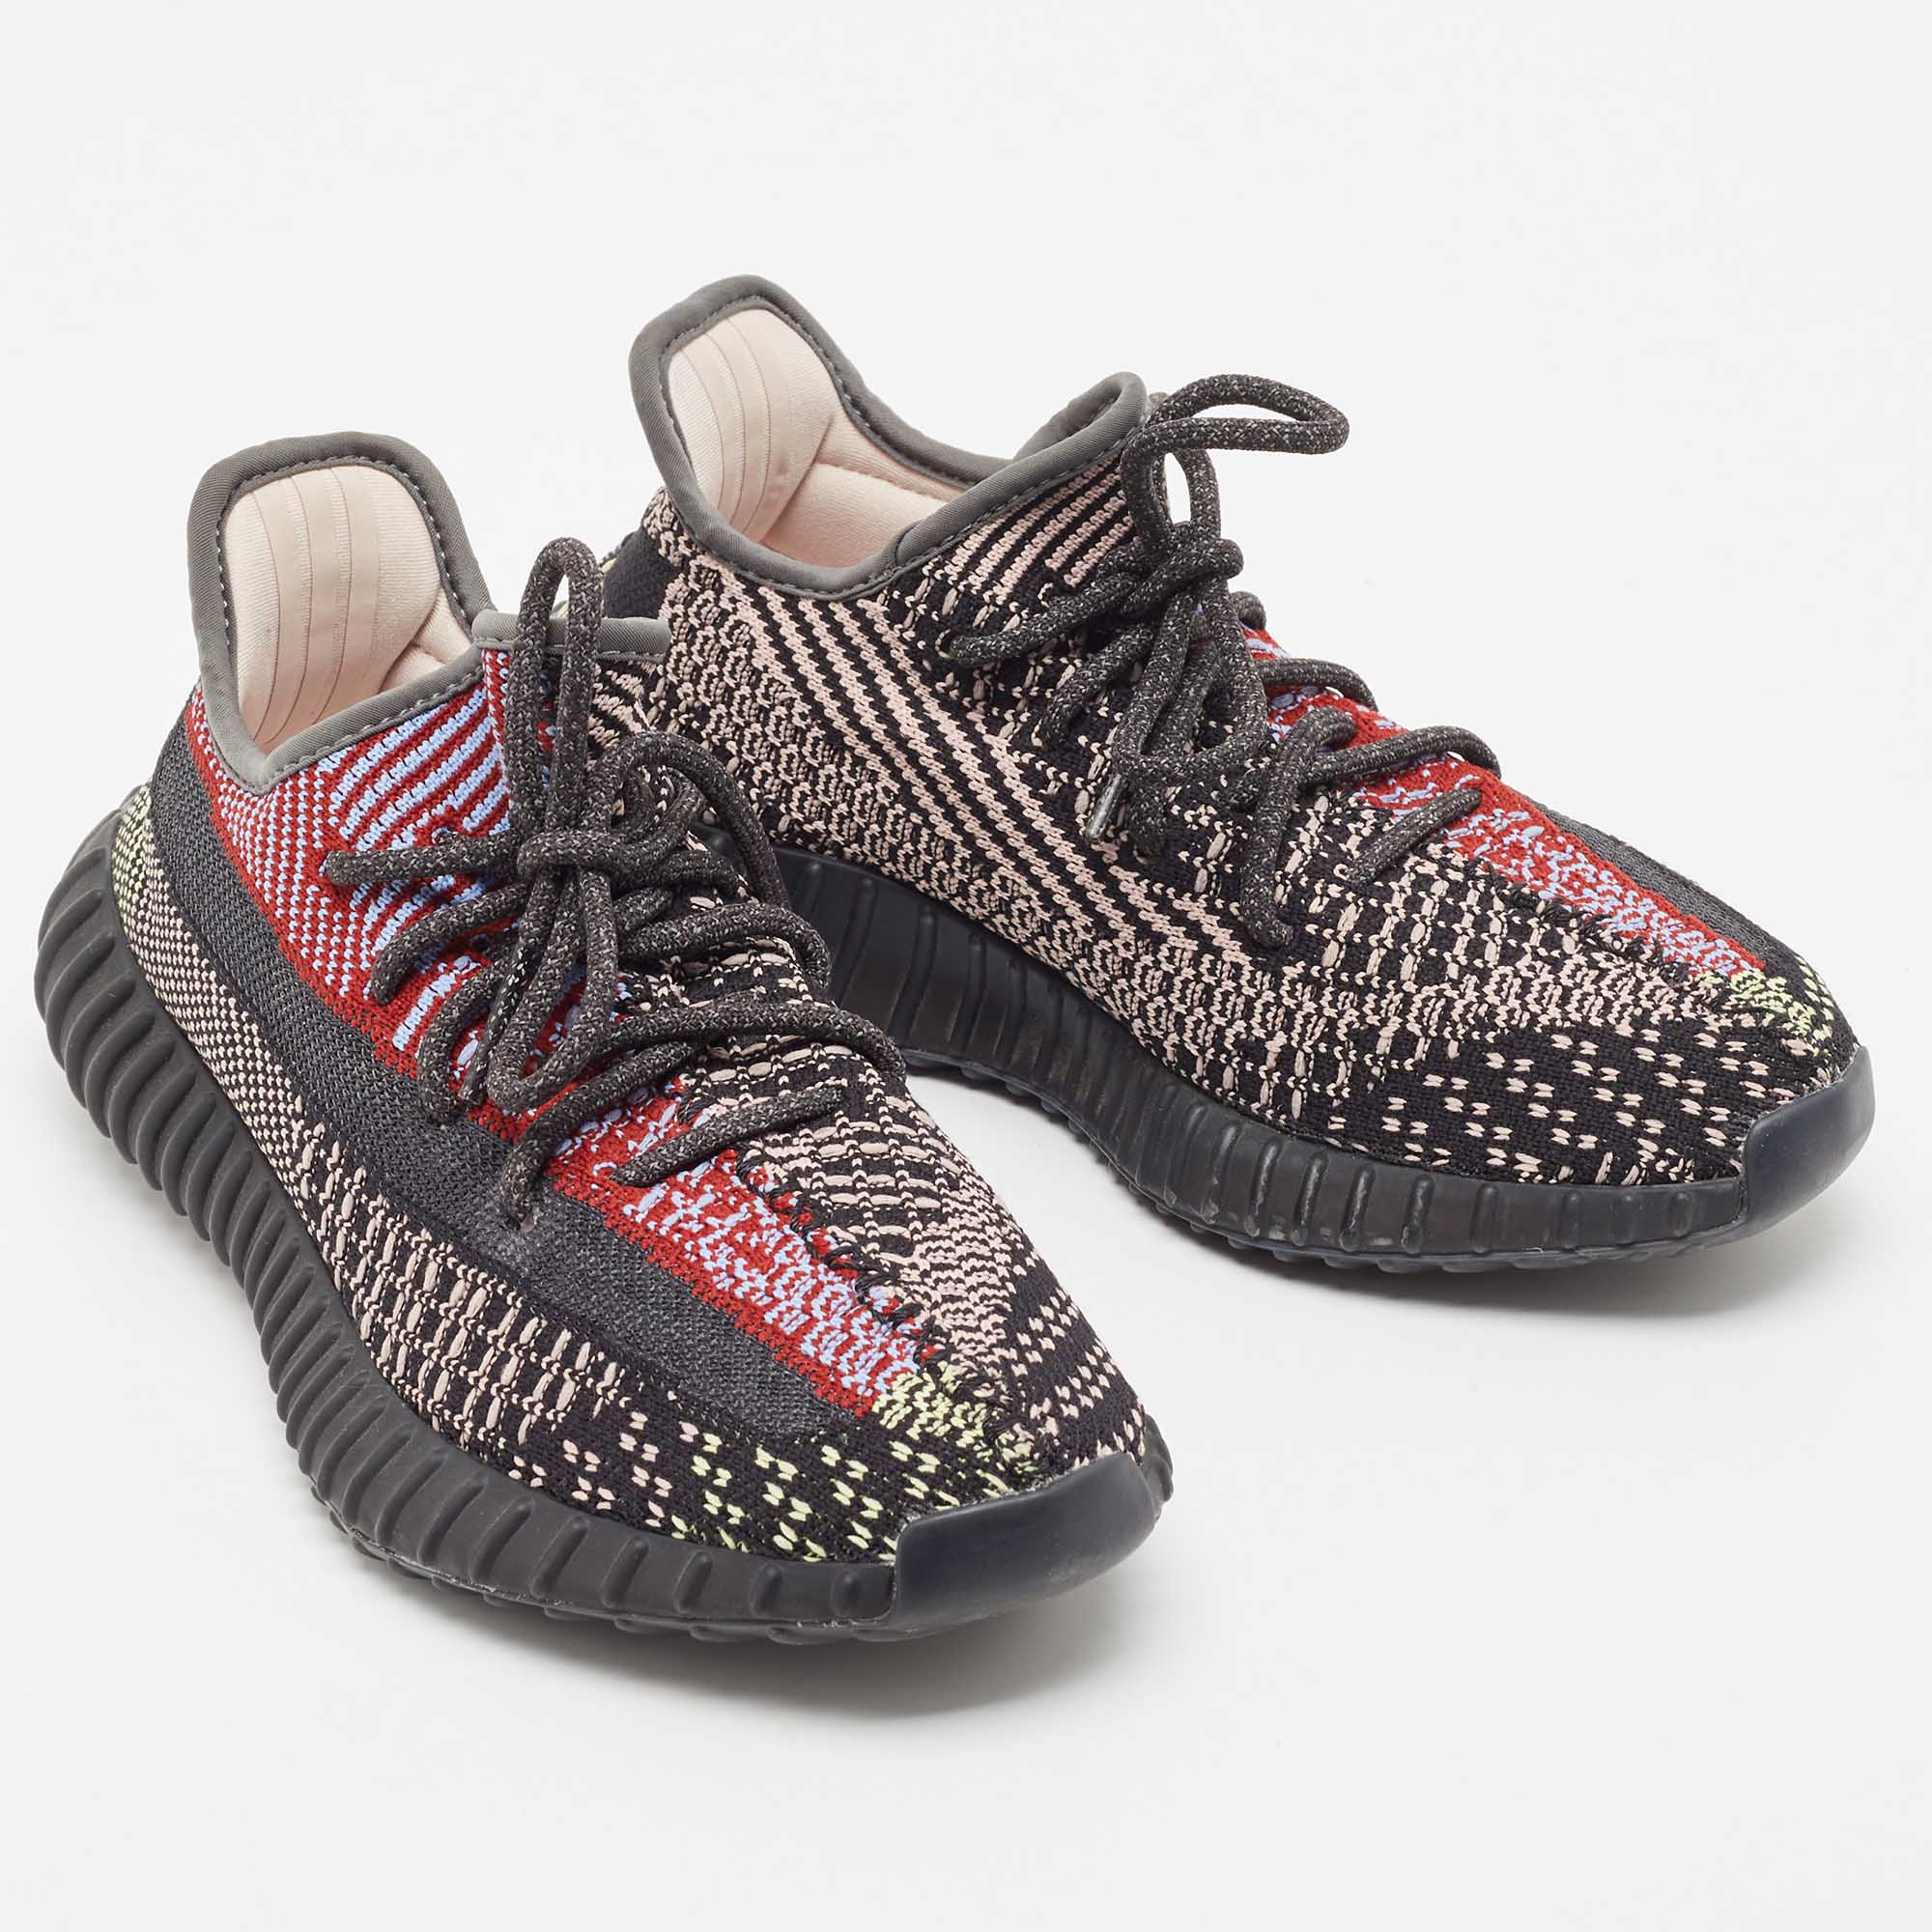 Yeezy X Adidas Multicolor Knit Fabric Boost 350 V2 Yecheil (Non-Reflective) Sneakers Size 38